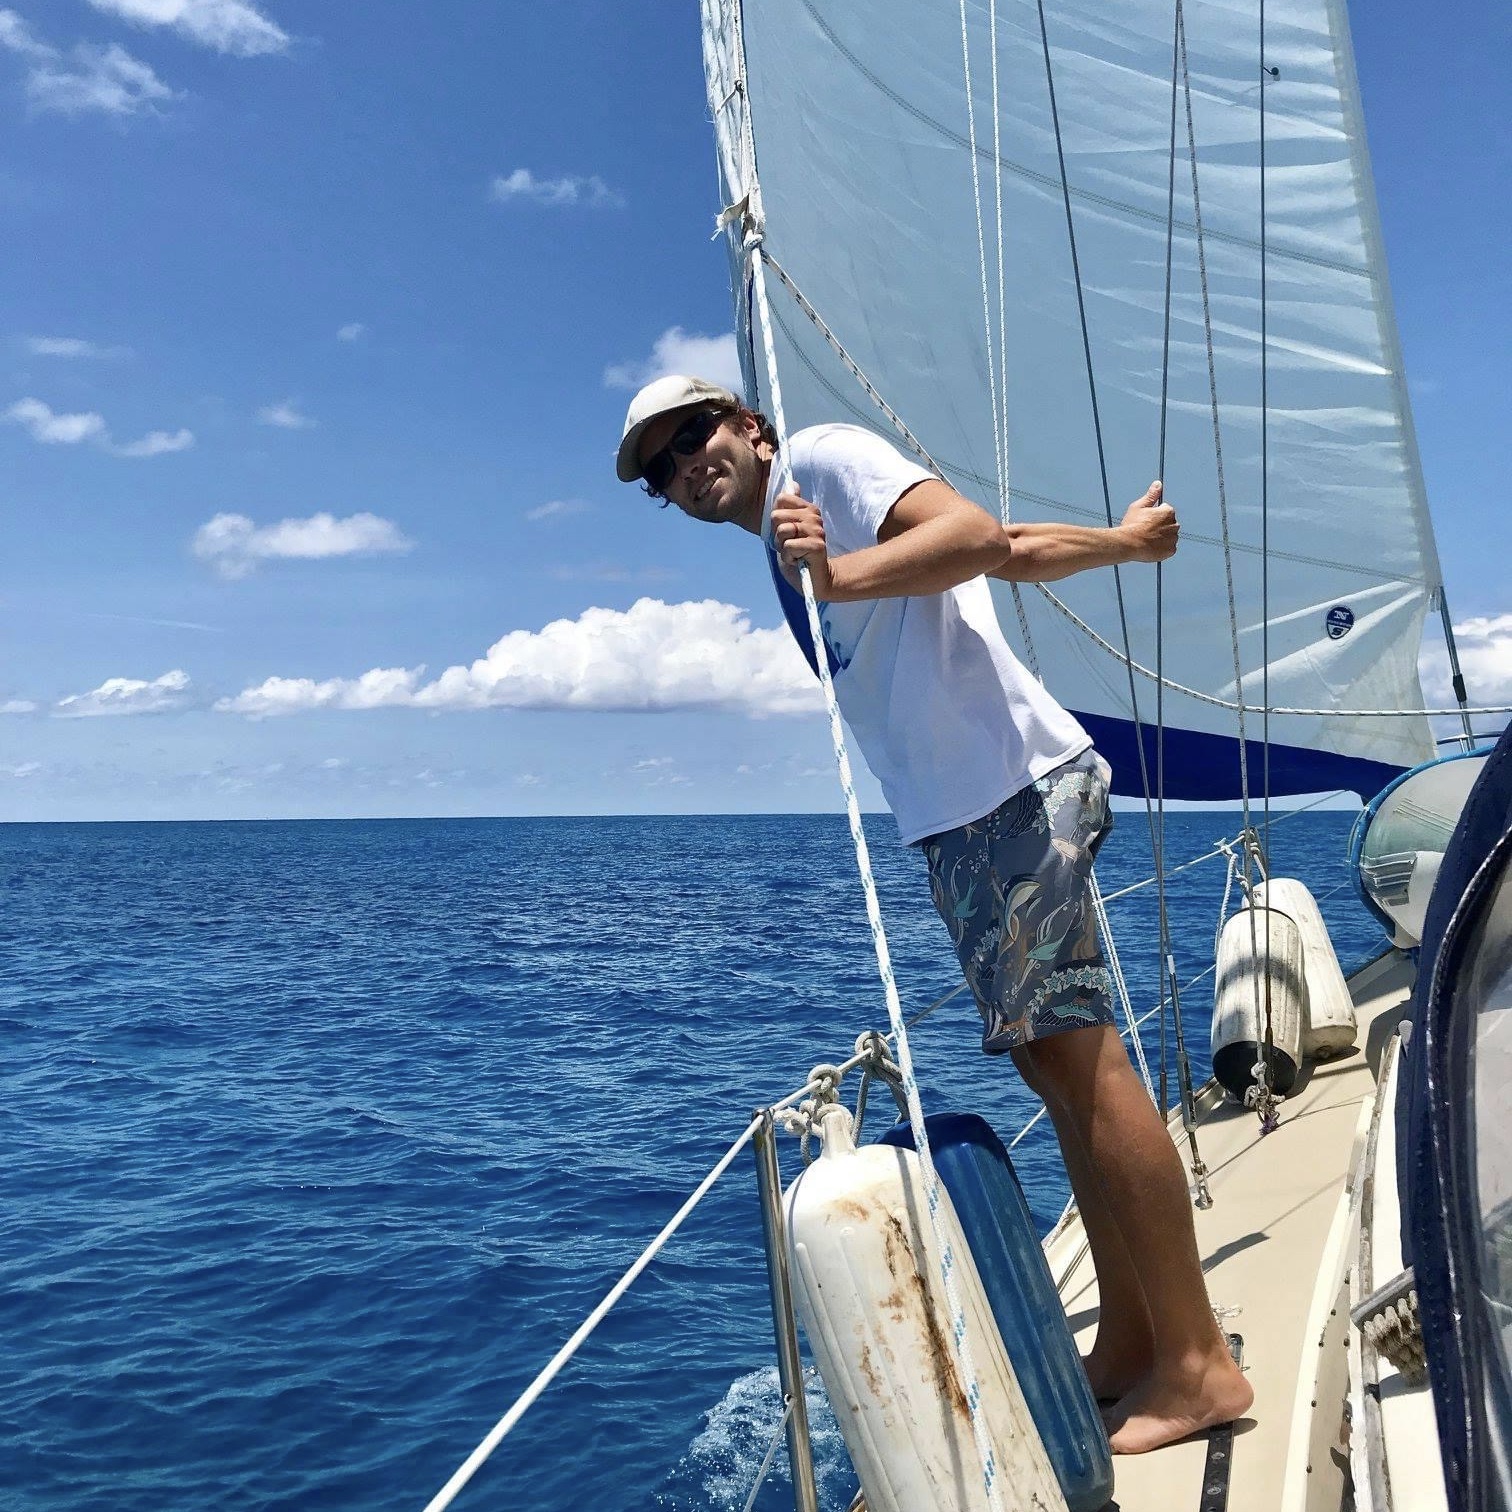 Embracing the ocean breeze whilst sailing.